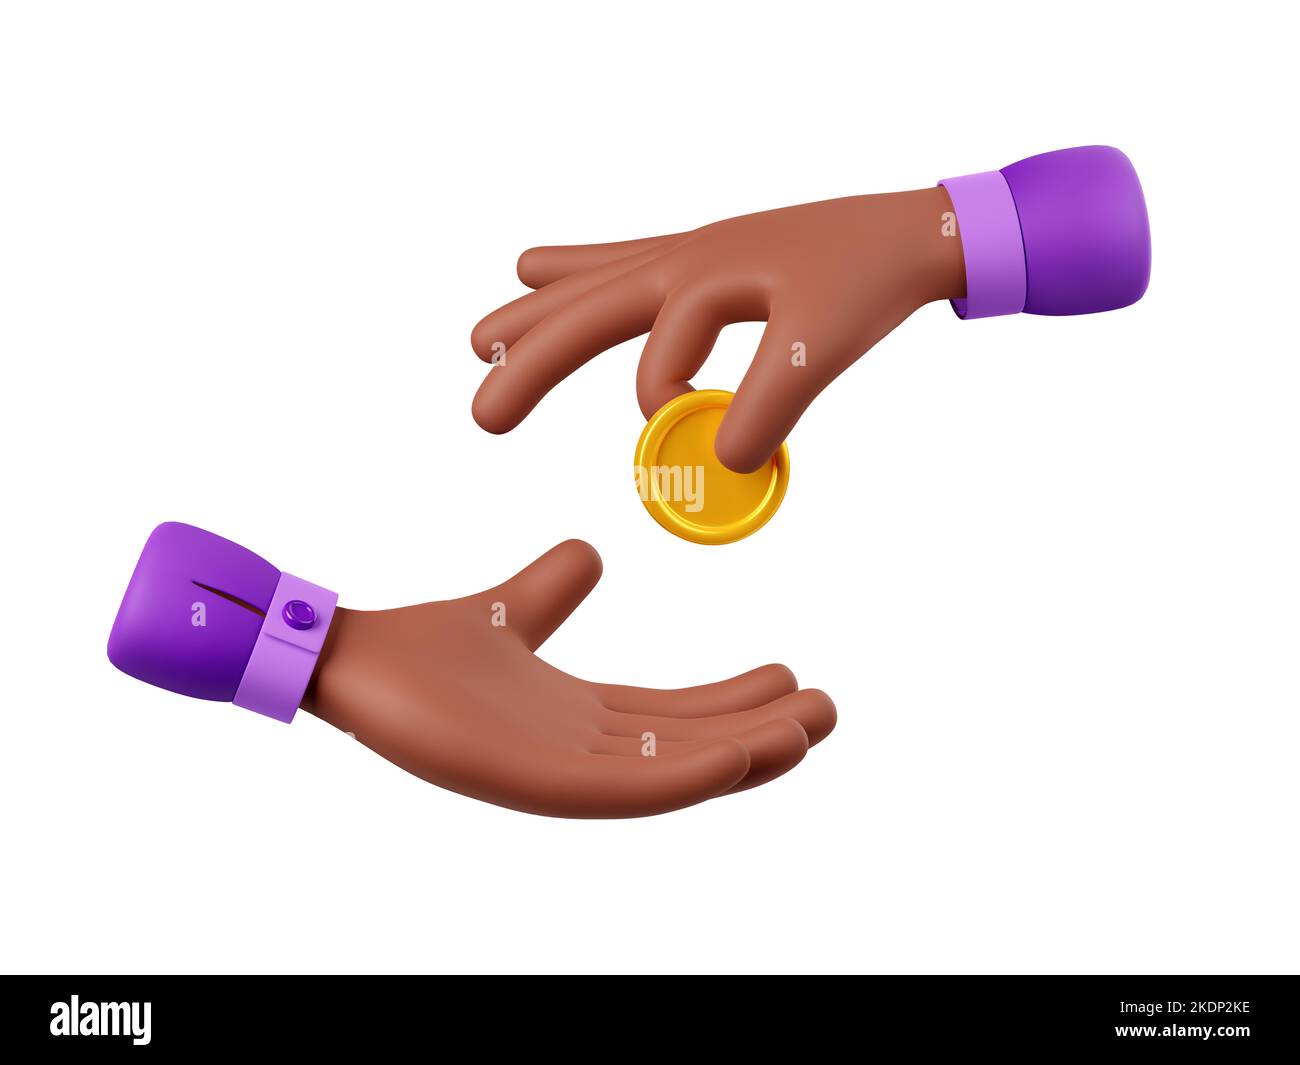 3D African American hands giving and taking golden coin isolated on white background. Illustration of character making charity donation, paying for service giving tips, receiving payment in cash Stock Photo